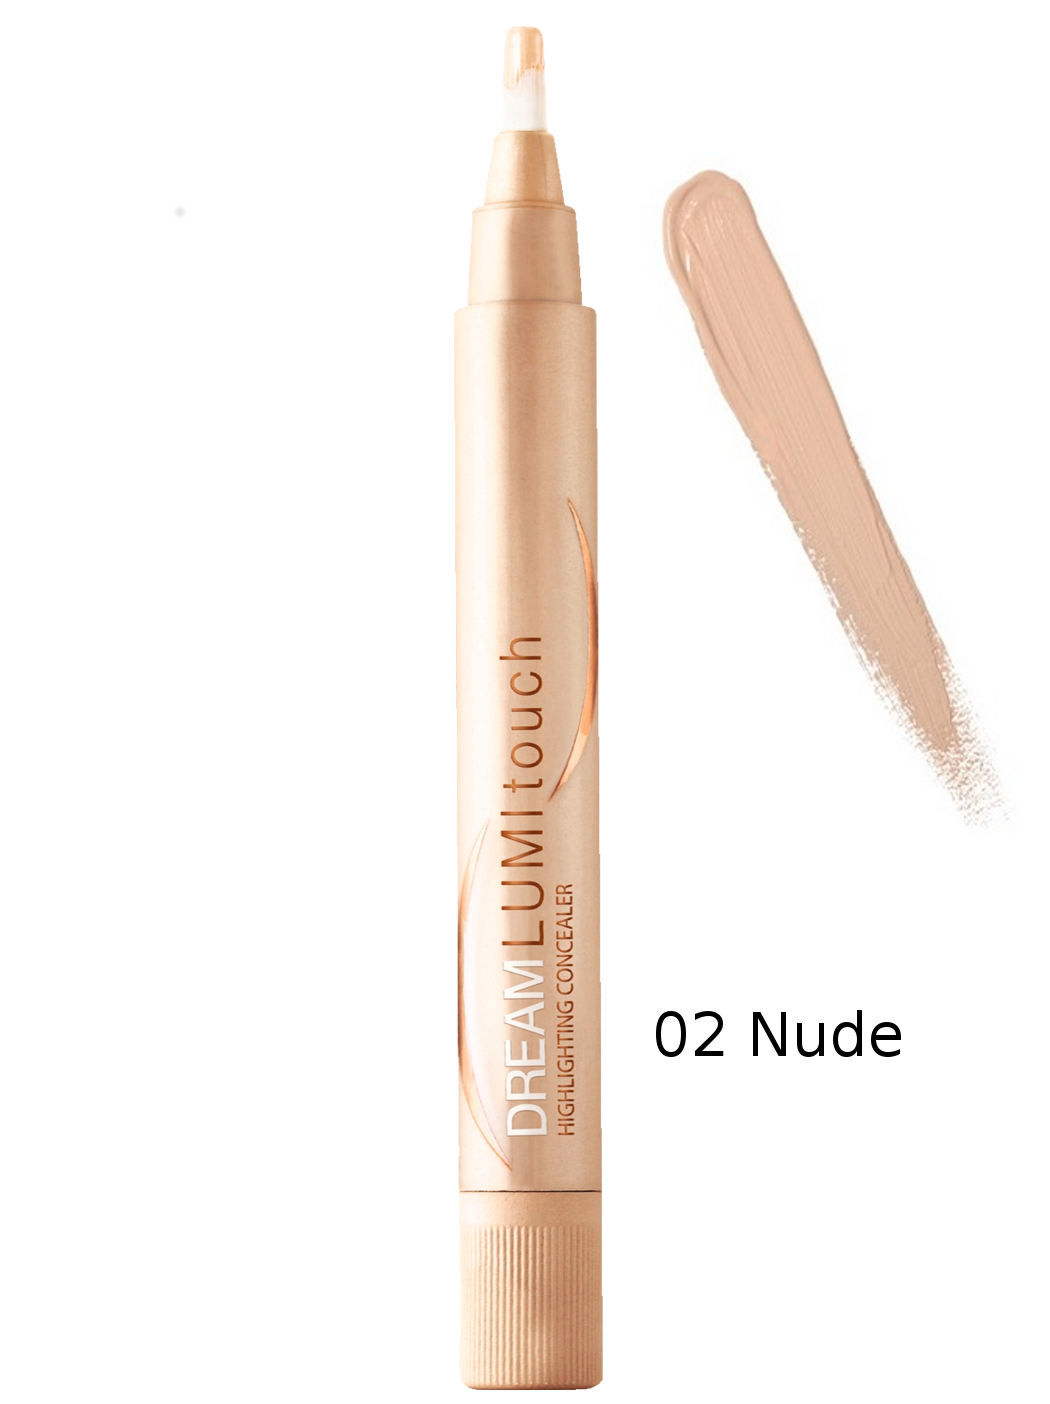 Maybelline Dream Lumi Touch Concealer 02 Nude